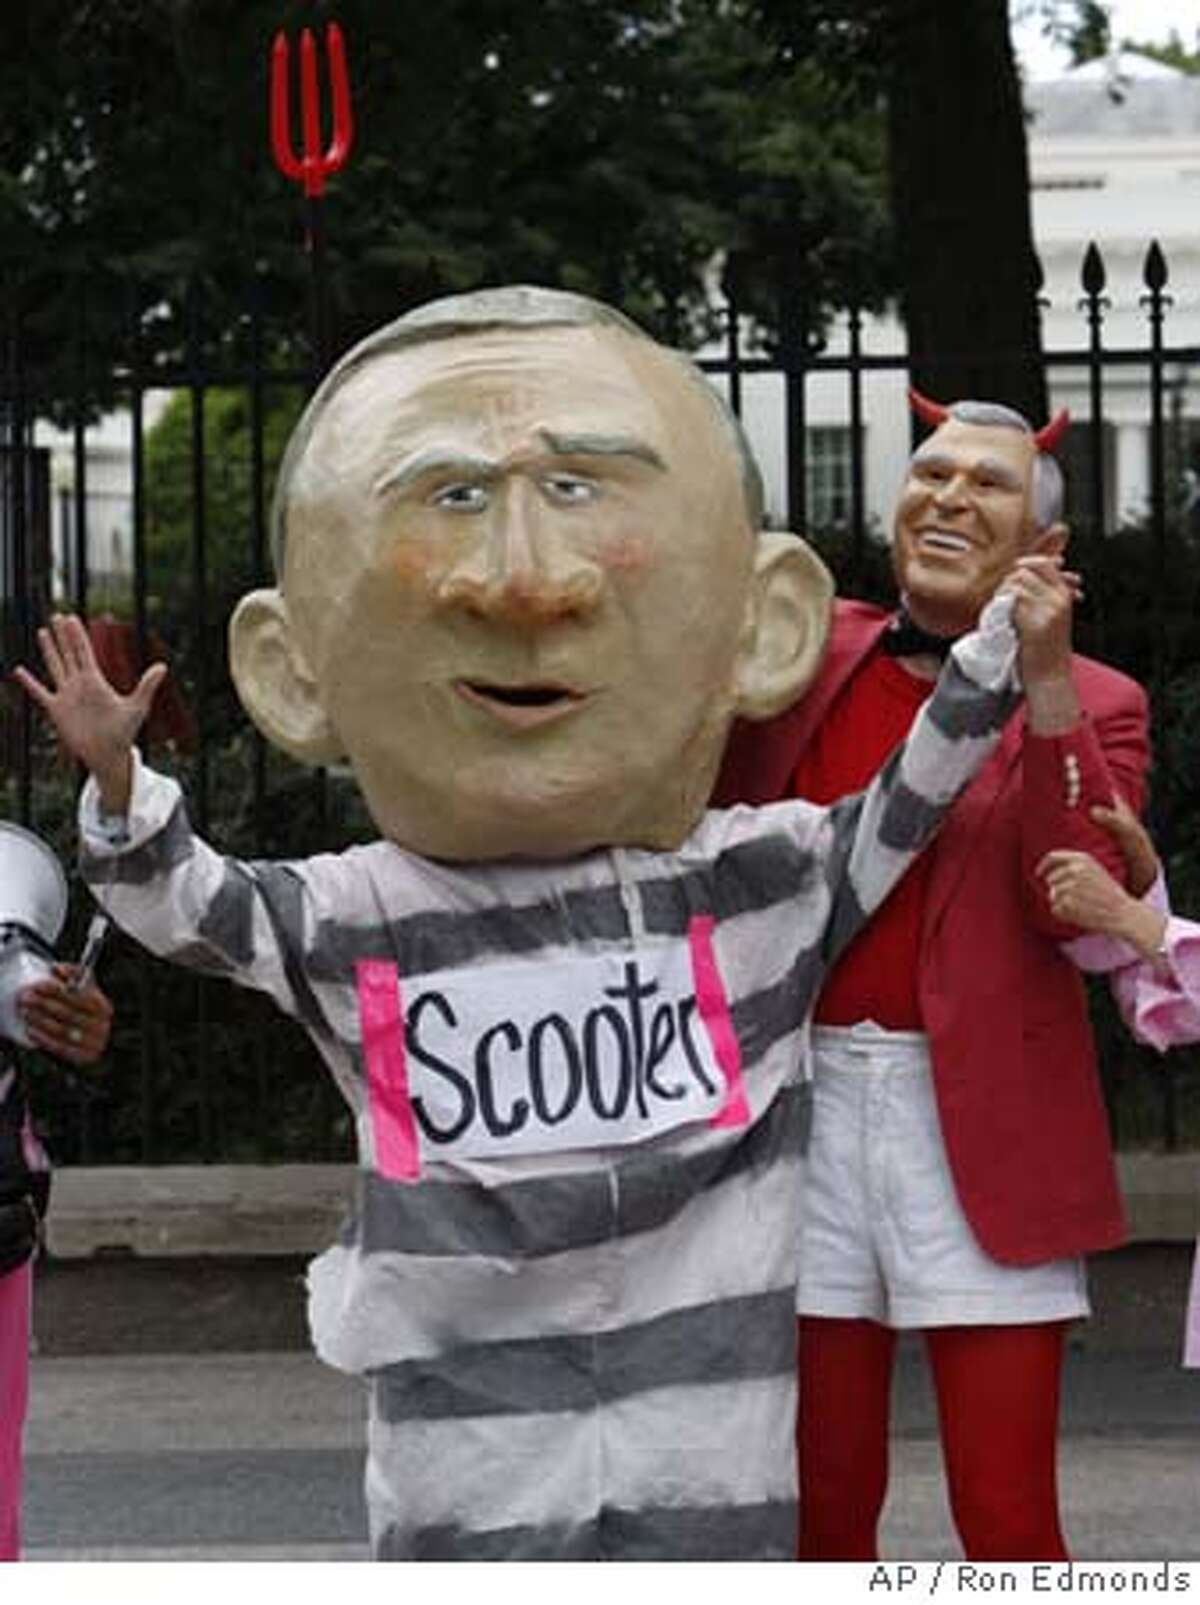 Members of the activist group Code Pink take part in a demonstration in front of the White House in Washington, Tuesday, July 3, 2007, to protest President Bush commuting of the prison sentence of I. Lewis "Scooter" Libby. (AP Photo/Ron Edmonds)